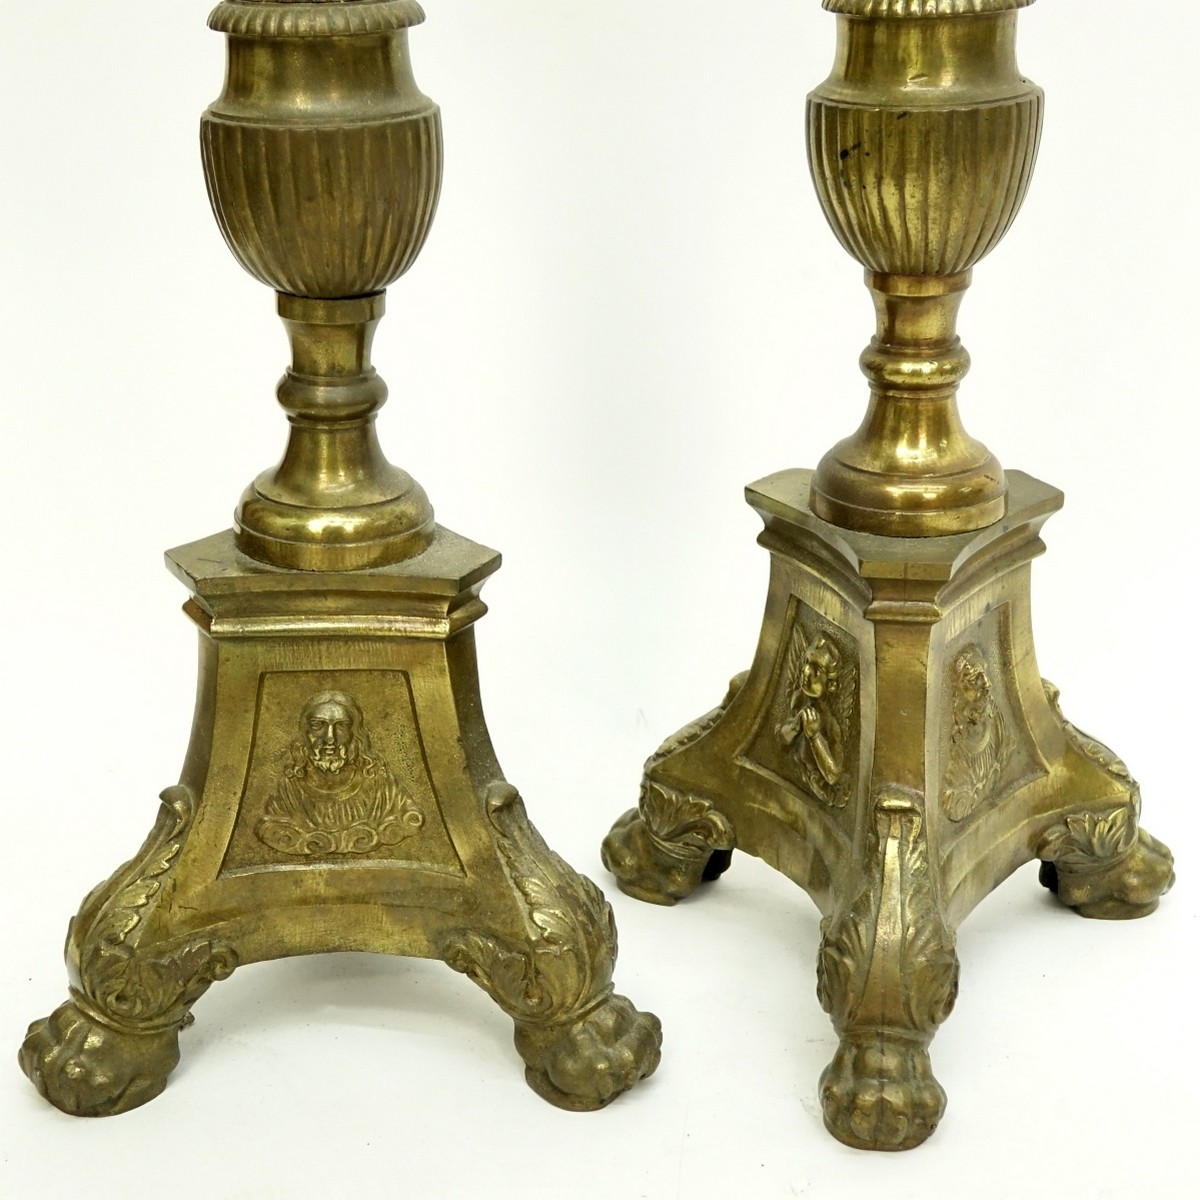 Pair of Large Brass Ecclesiastical Candlesticks